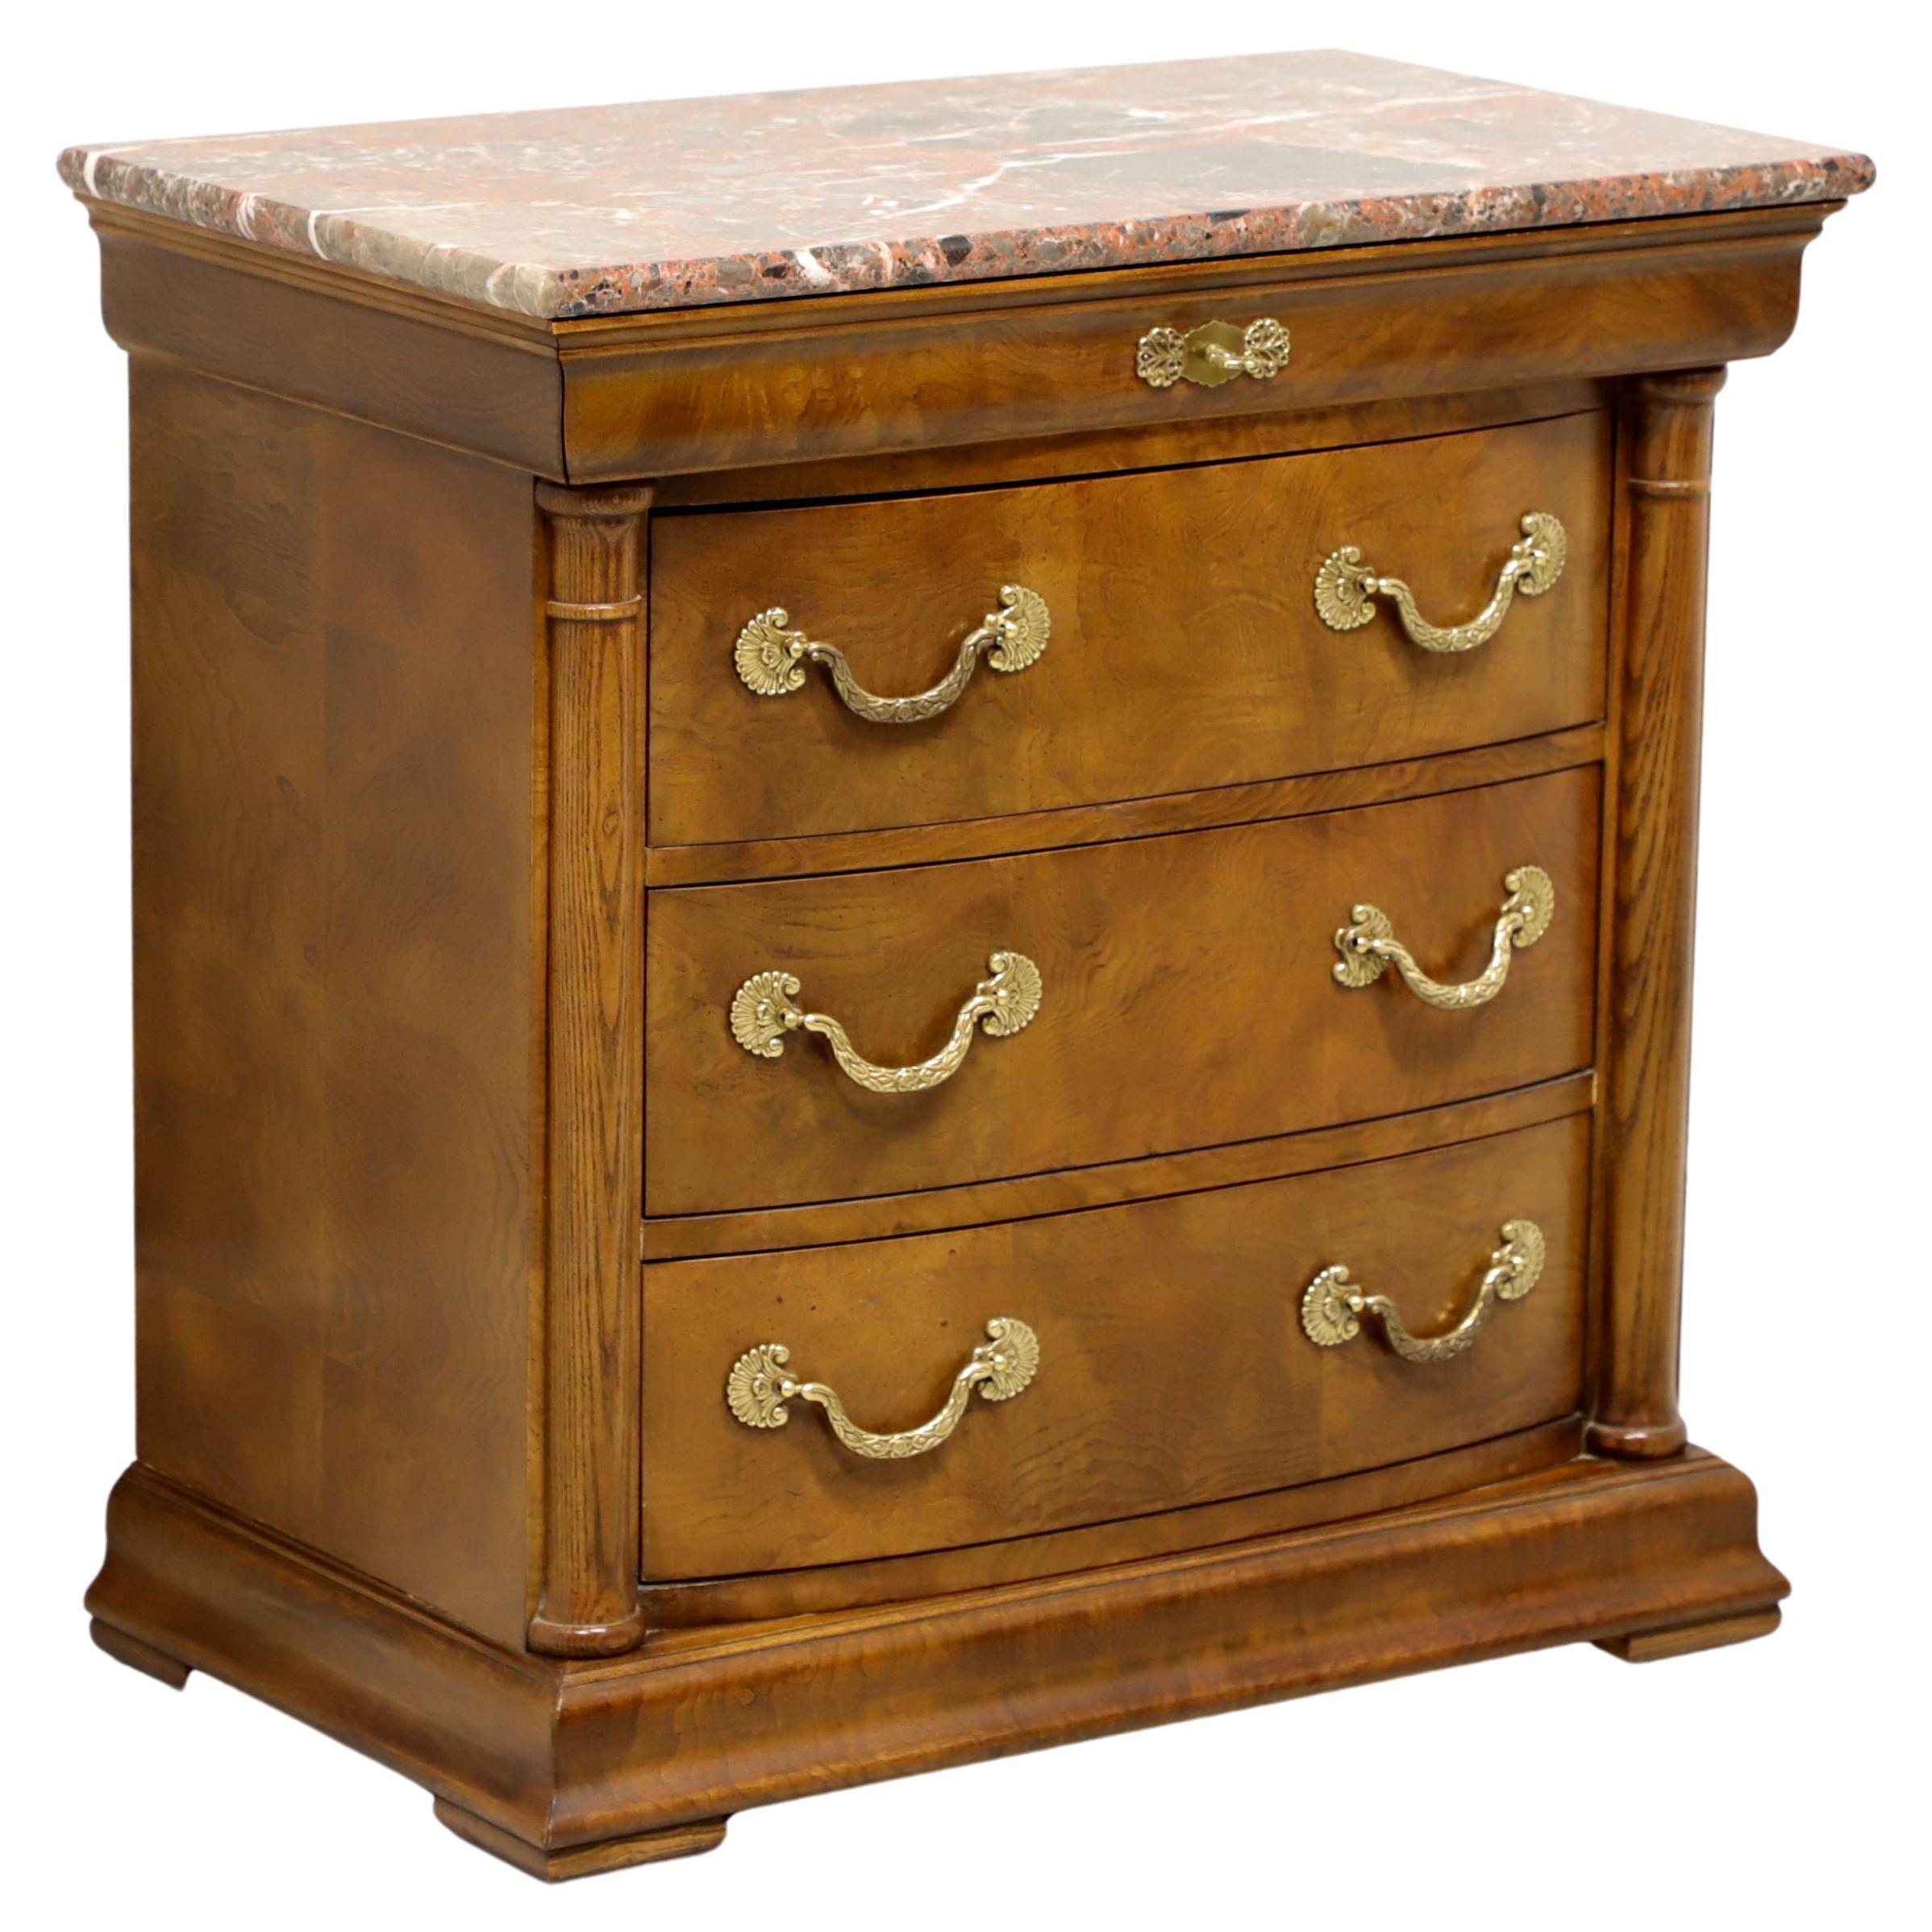 HENREDON Burl Elm Neoclassical Marble Top Nightstand Bedside Chest - A